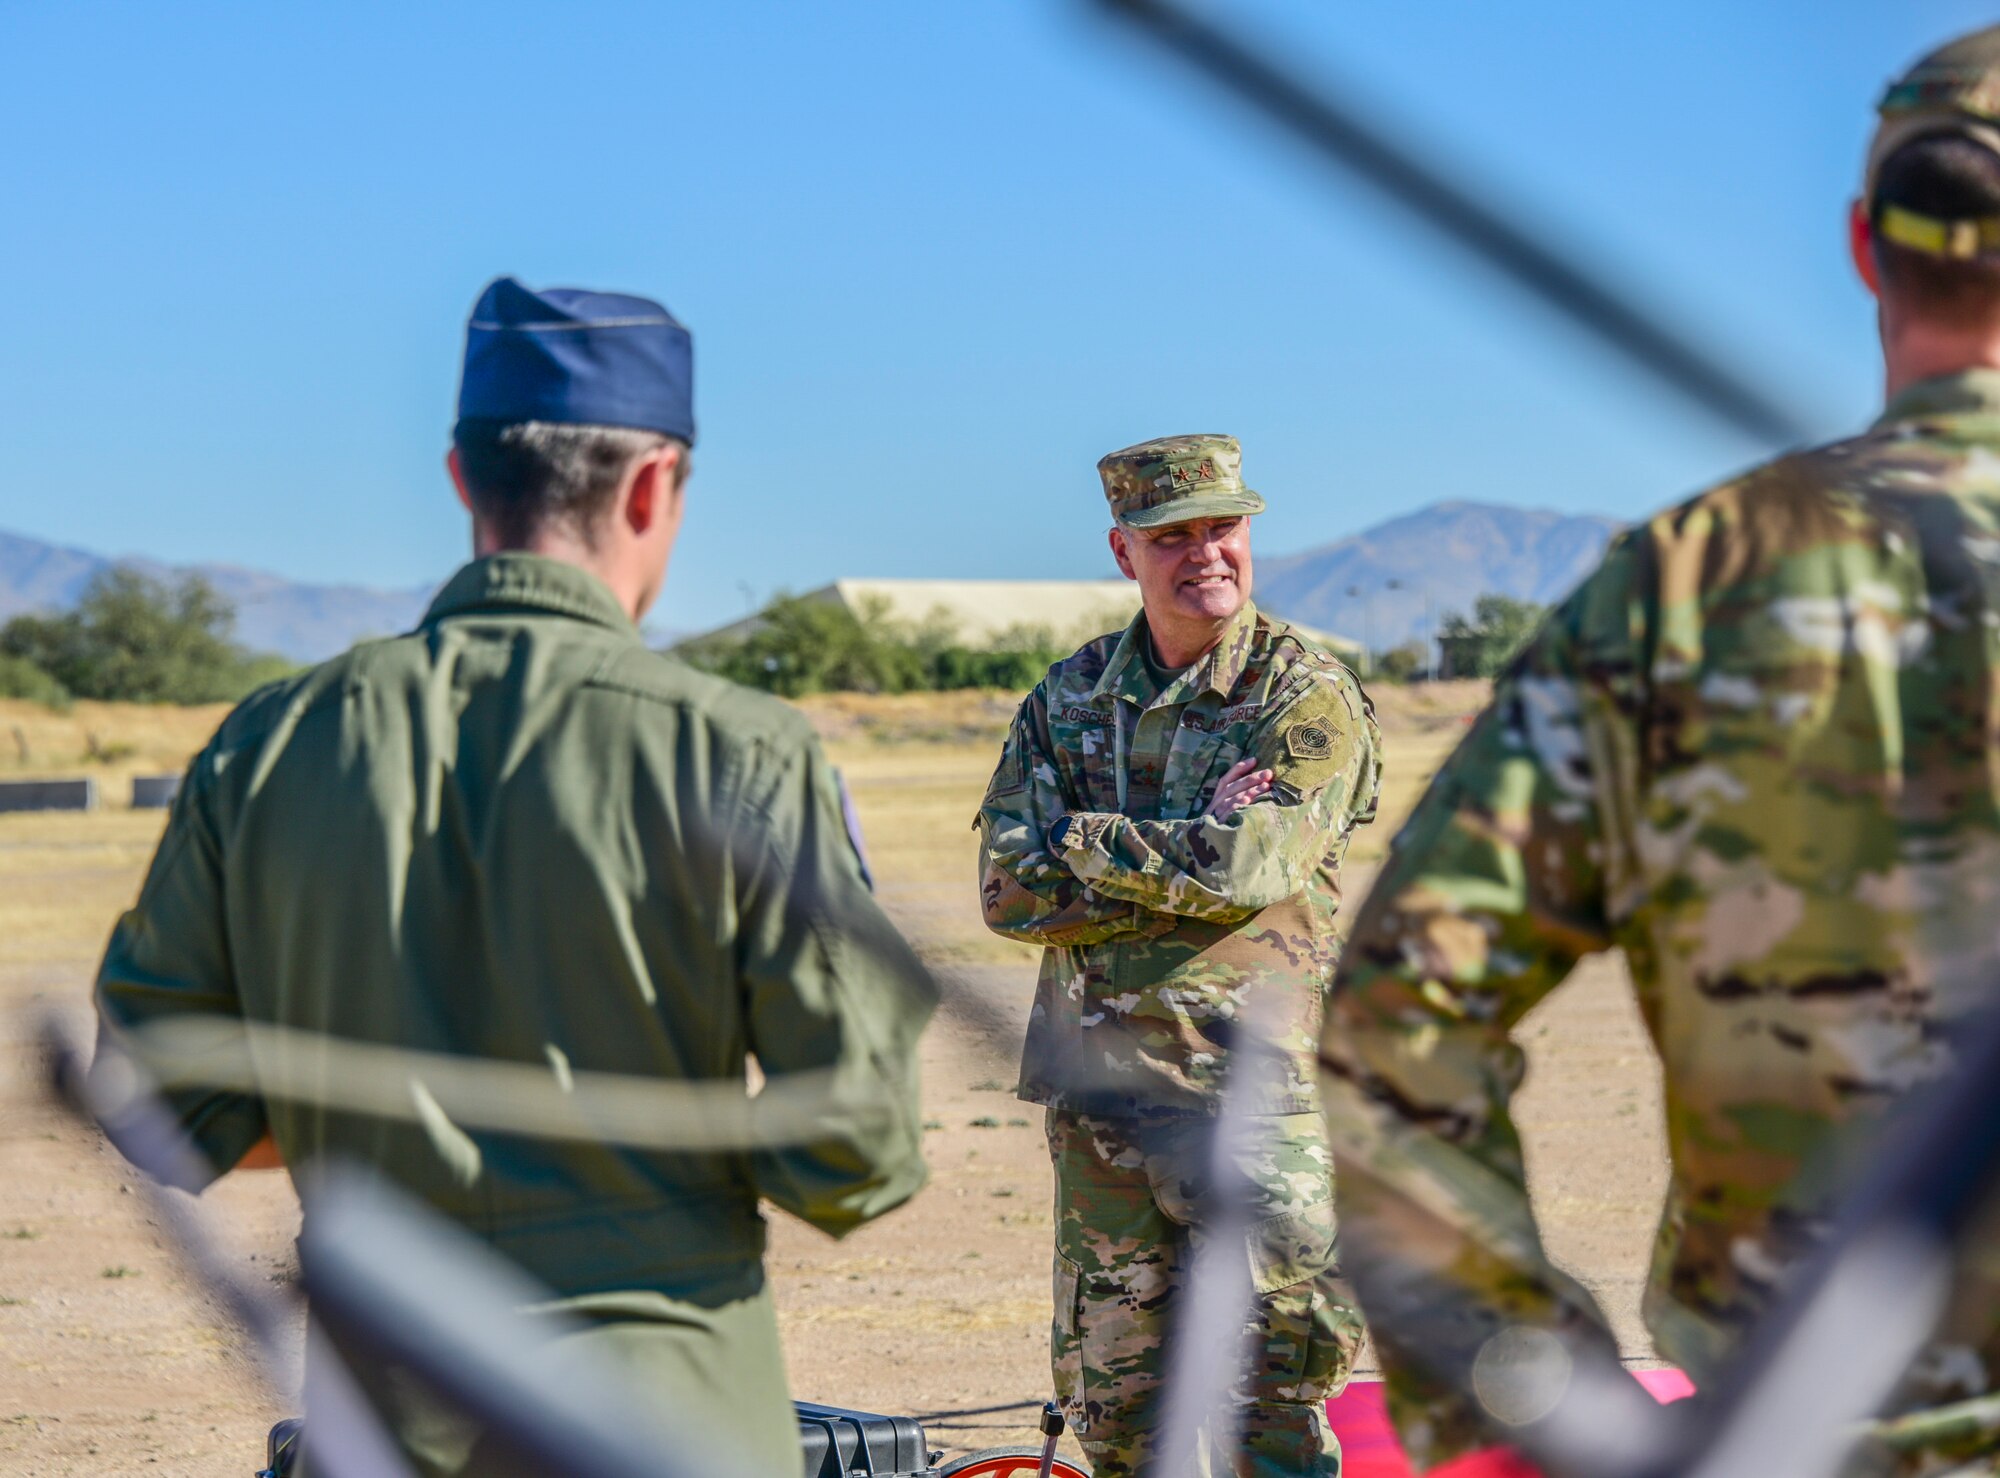 A photo of the 15th Air Force Commander listening to a presentation.